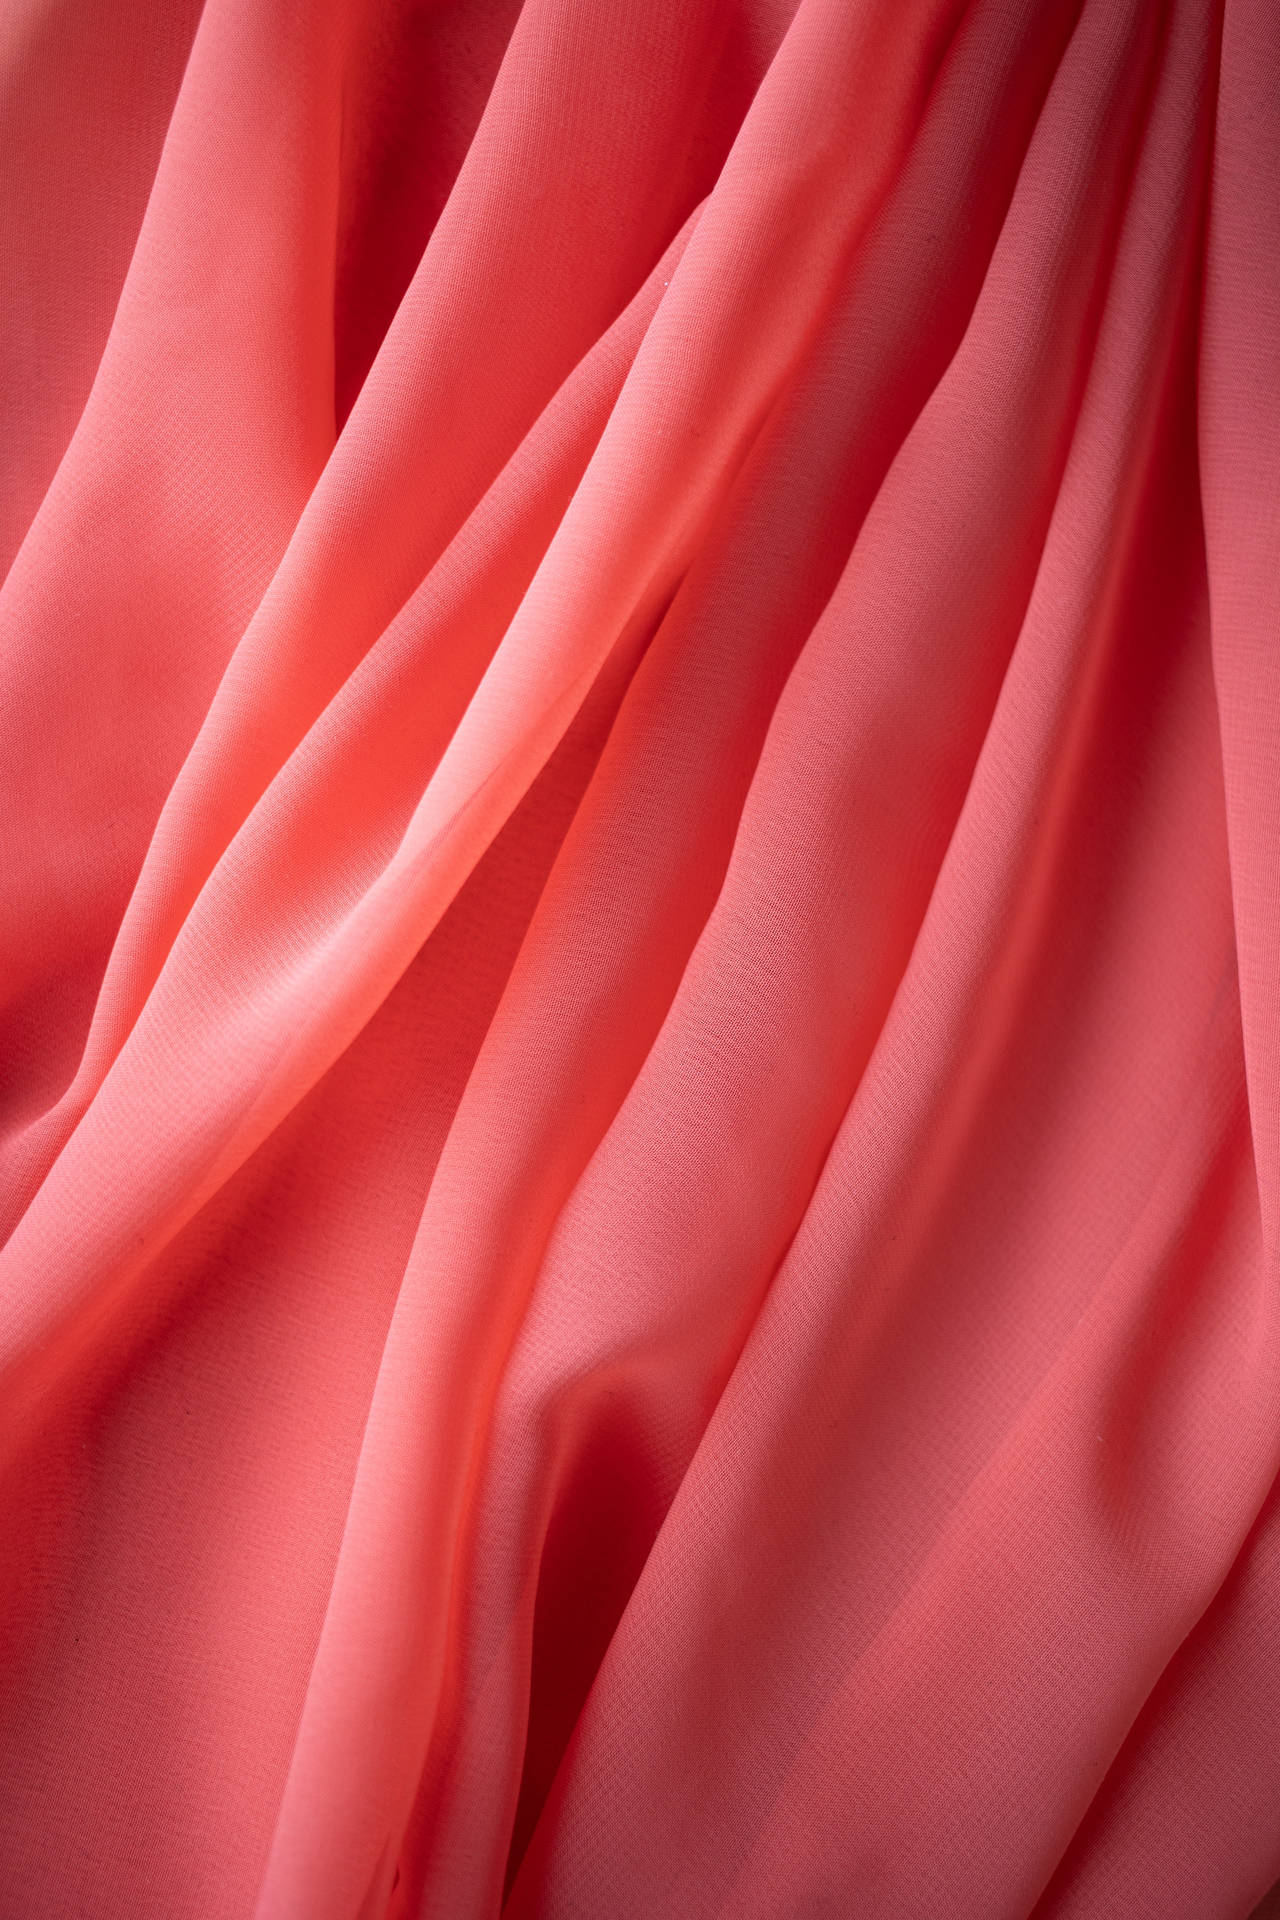 Solid Pastel Color Red Silk Wallpaper